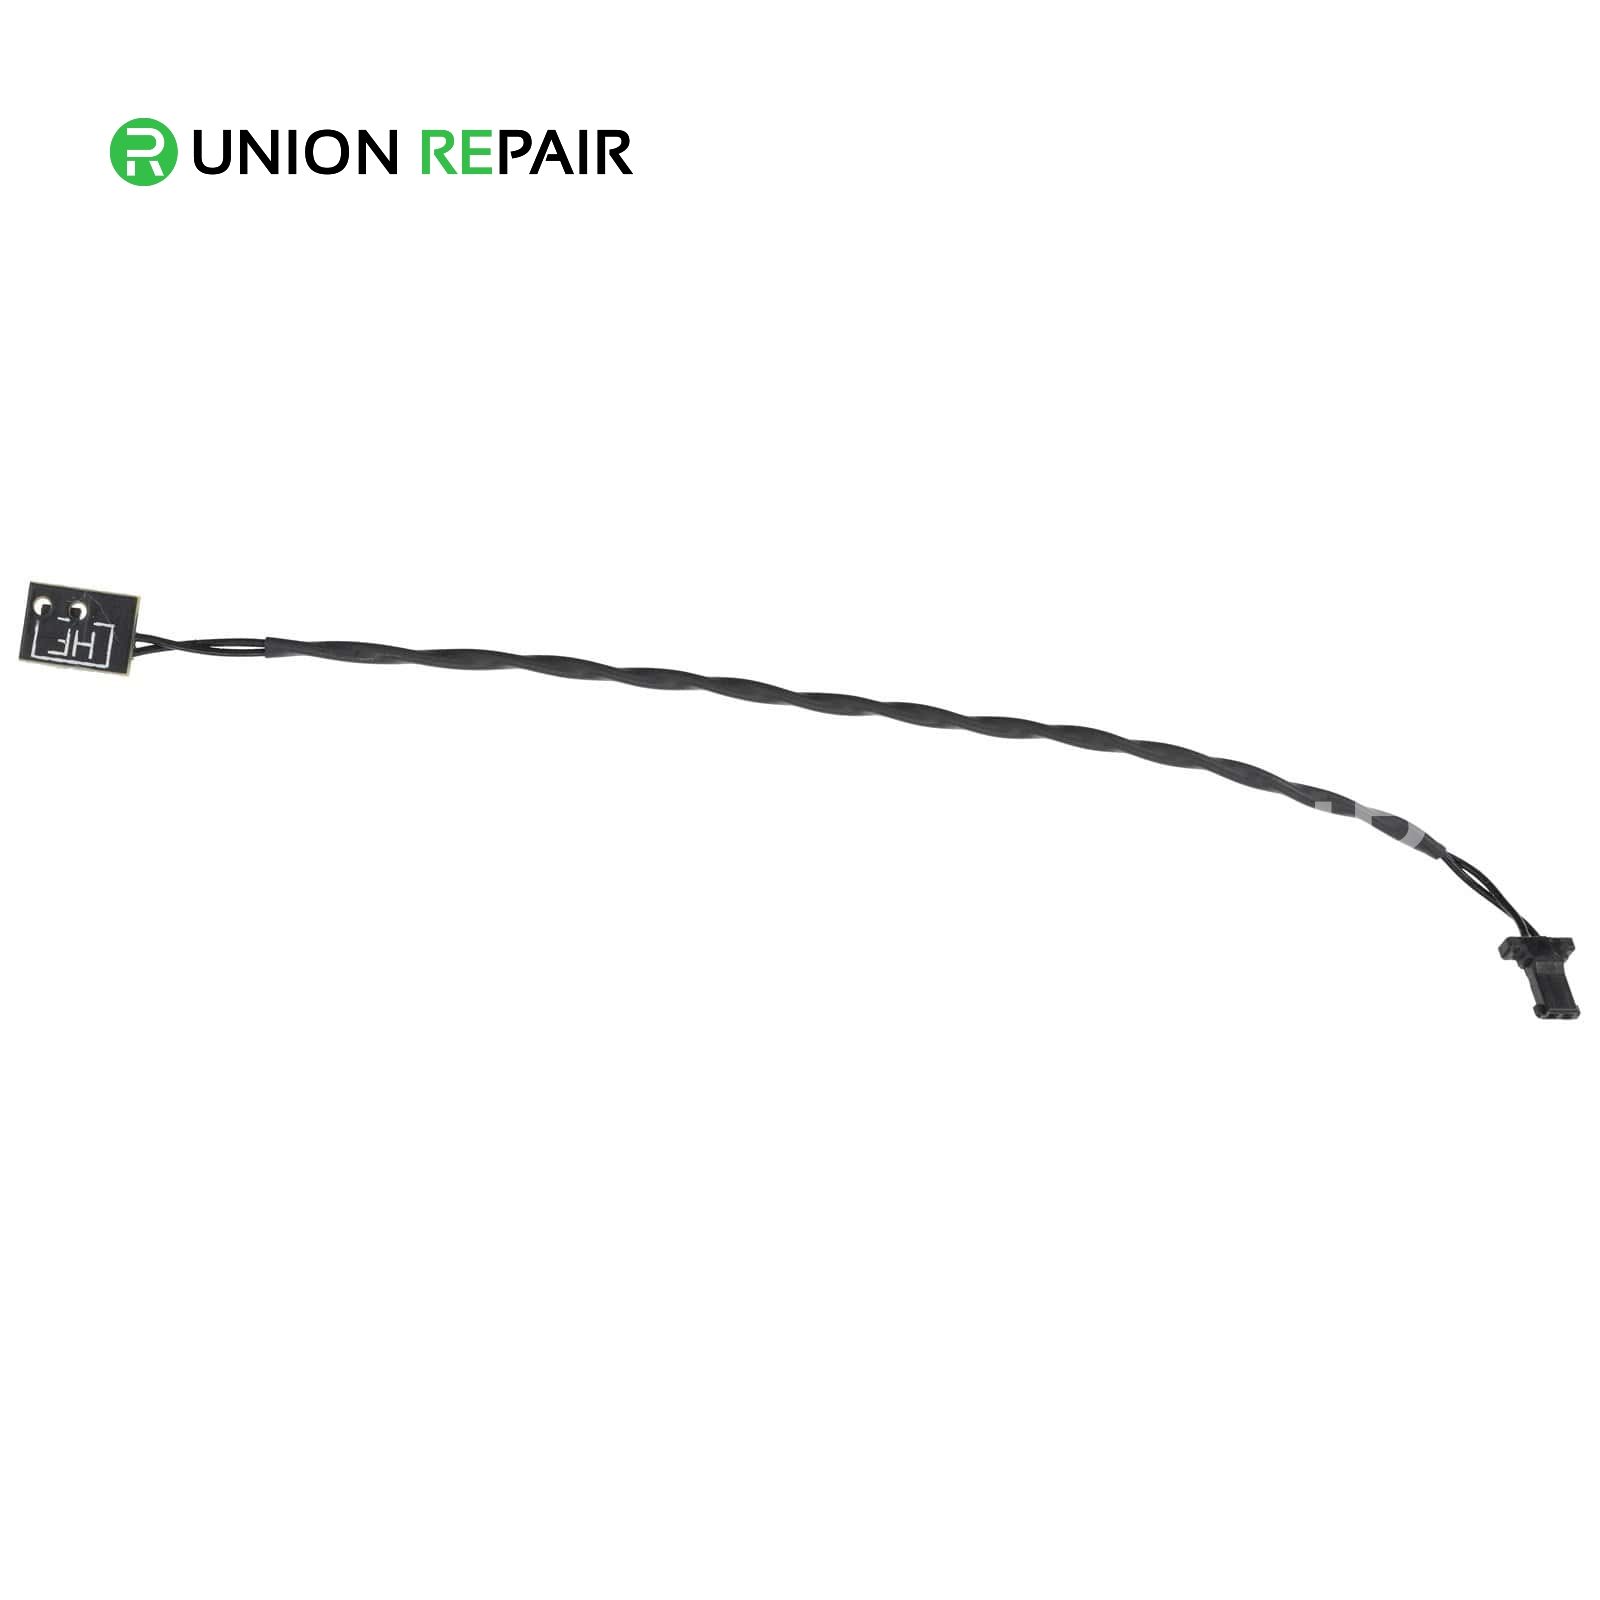 LCD Temperature Sensor Cable for iMac 27" A1419 (Late 2012,Late 2013)